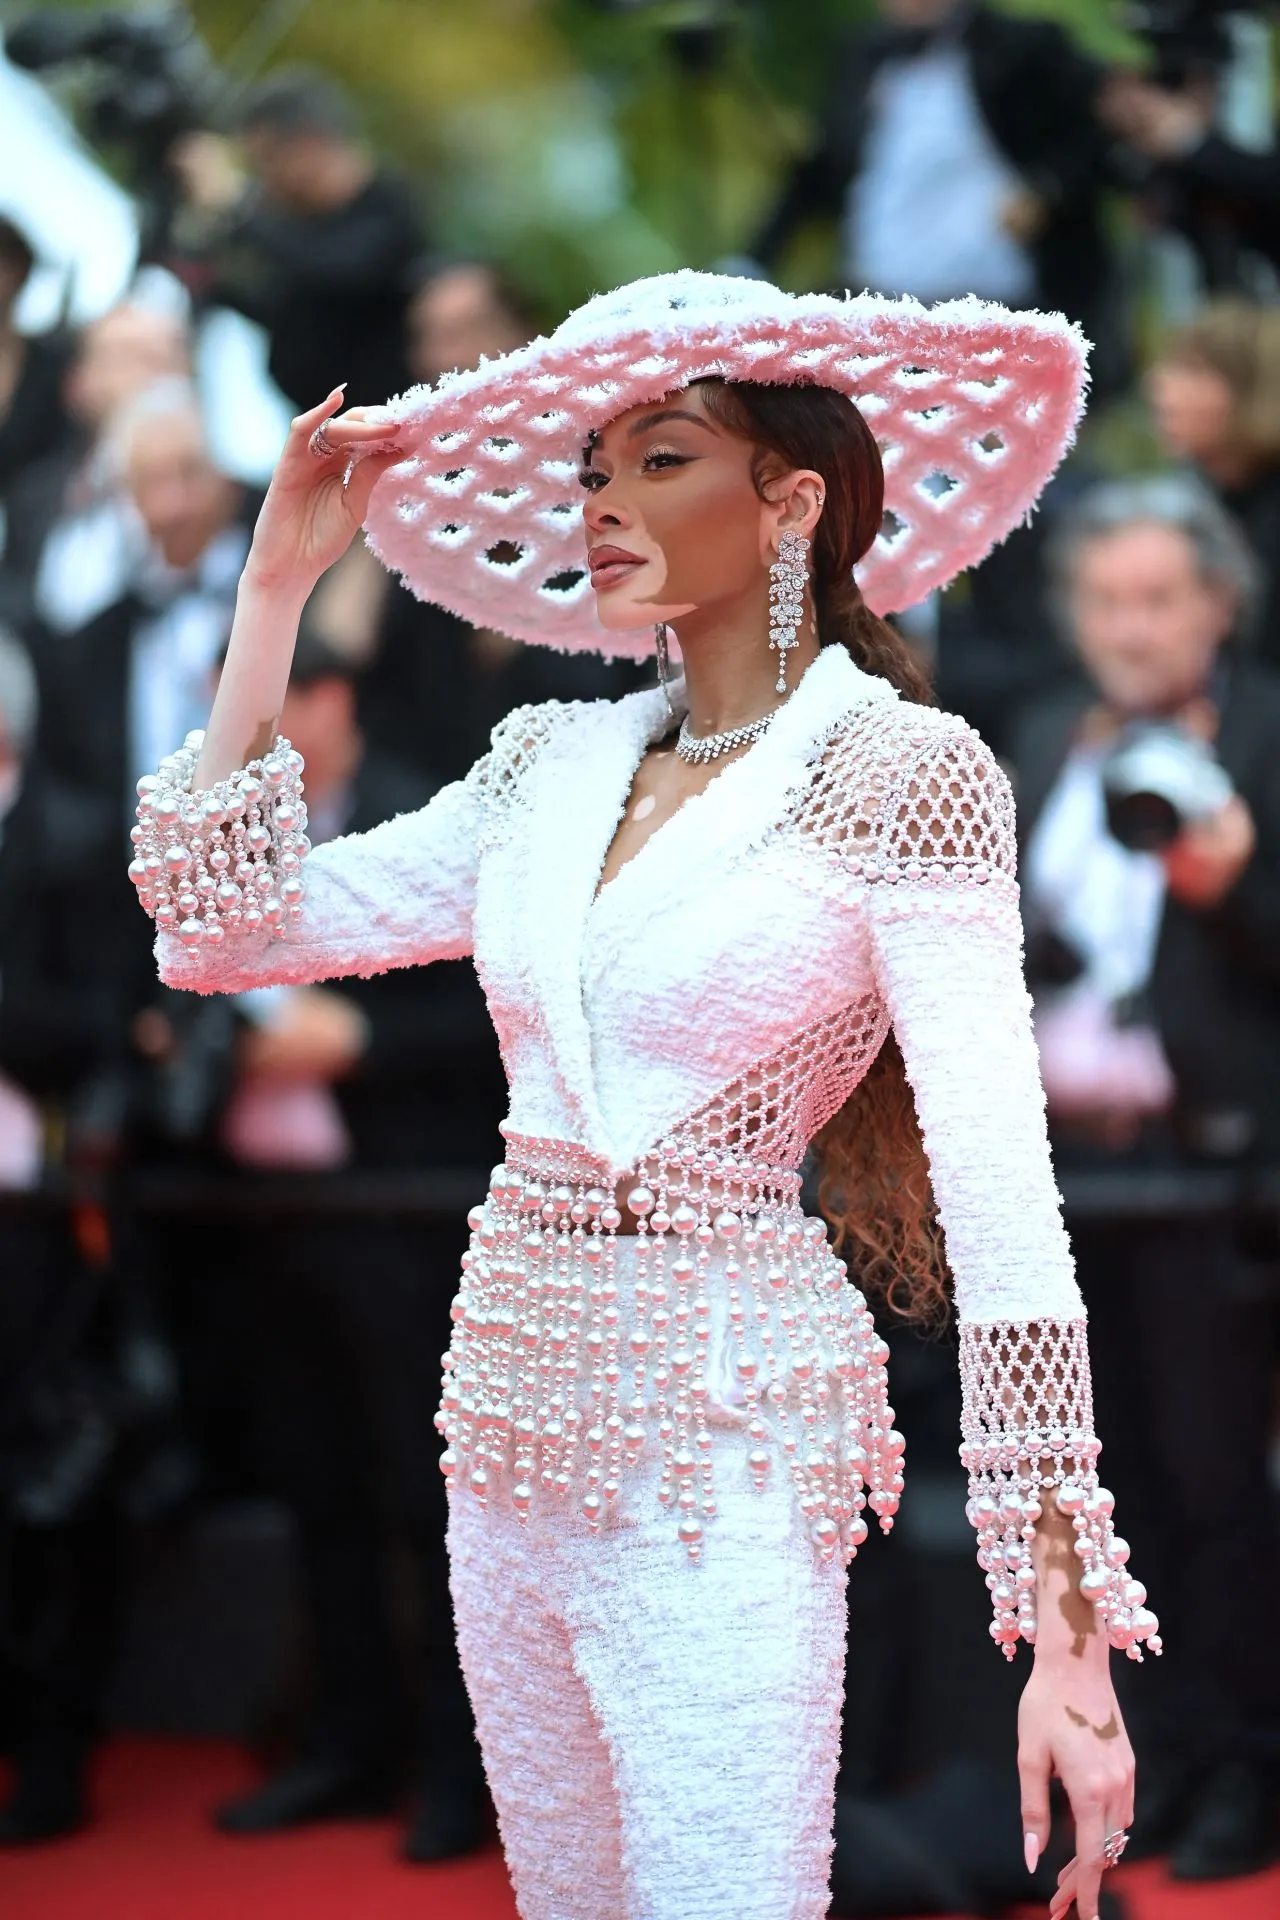 WINNIE HARLOW AT THE APPRENTICE PREMIERE AT CANNES FILM FESTIVAL5